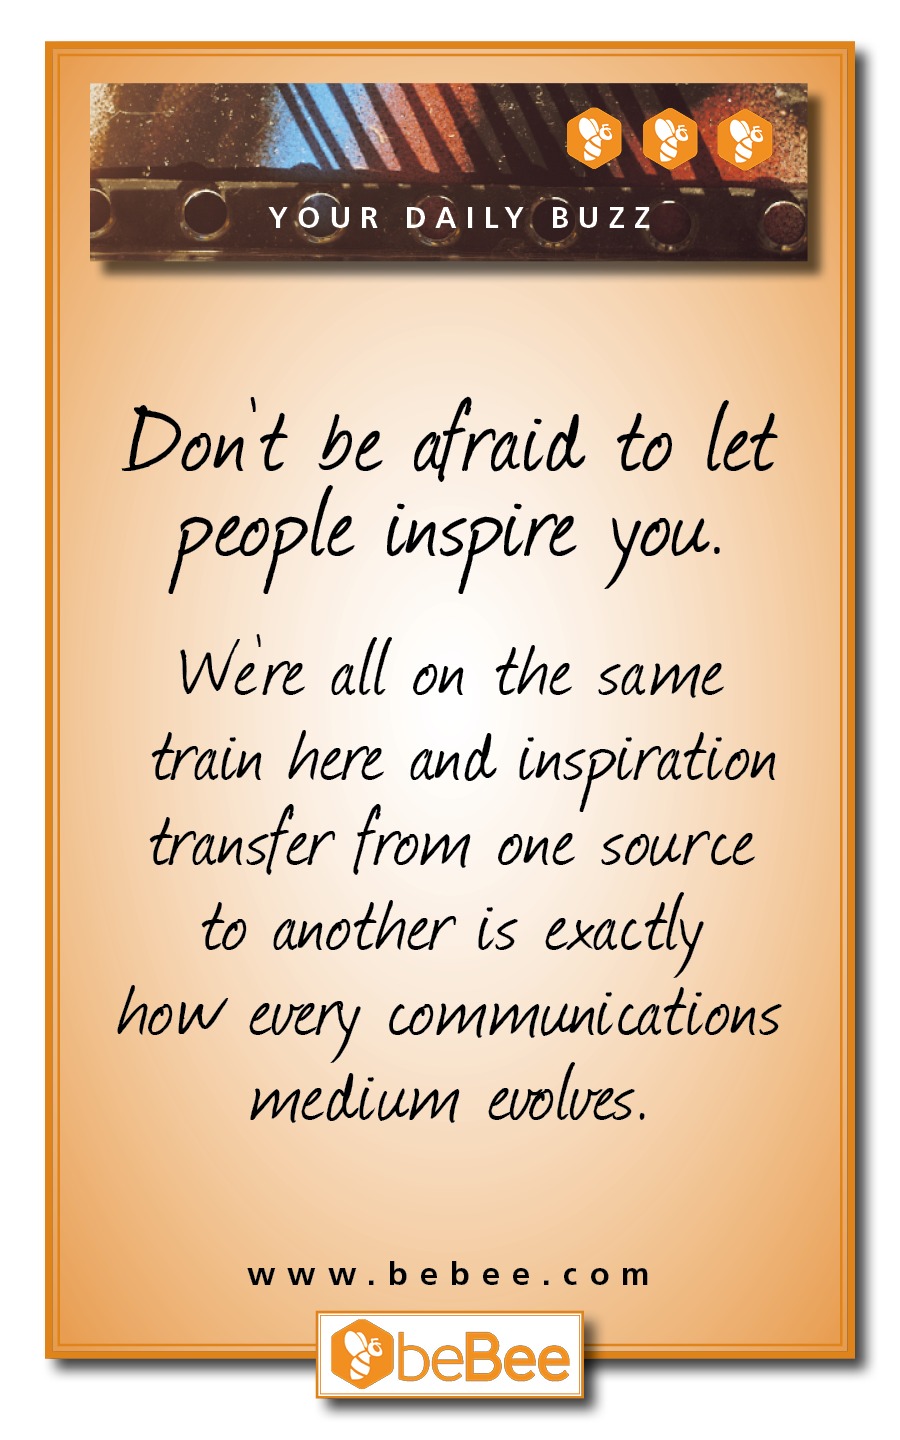 (ET

 

- — q > es =
YOUR DAILY BUZZ

Don't be afraid. to let
people inspire. you.

Were all on the same
train here and. inspiration
transfer from one source

to another is exactly

how every communications
wiedium evolves.

www.bebee.com